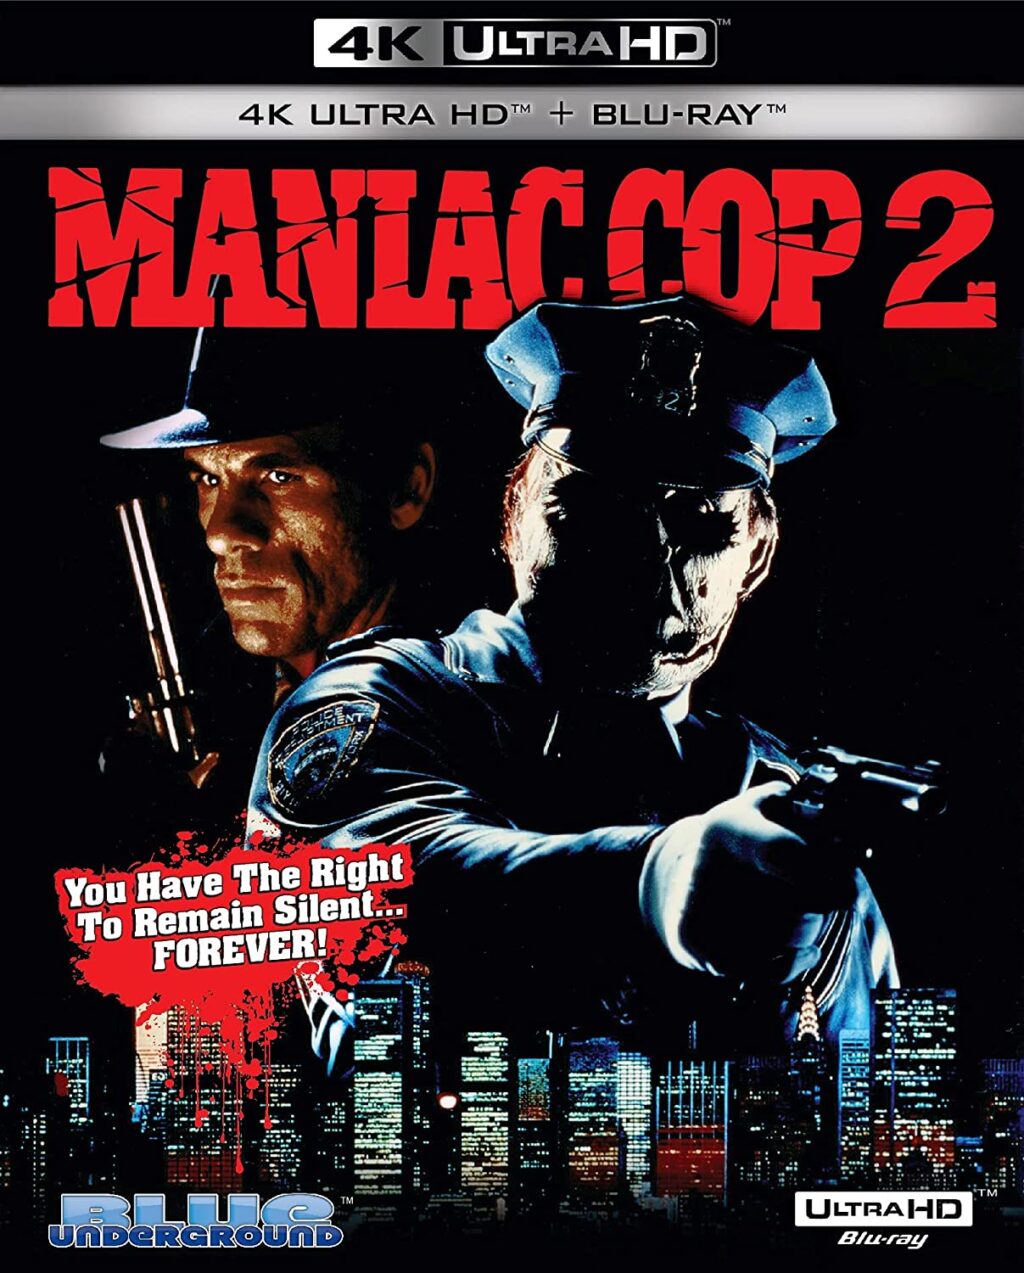 maniac cop 2 4k 1024x1273 - 'Maniac Cop 2' 4K Review: You Have the Right to Buy This Release